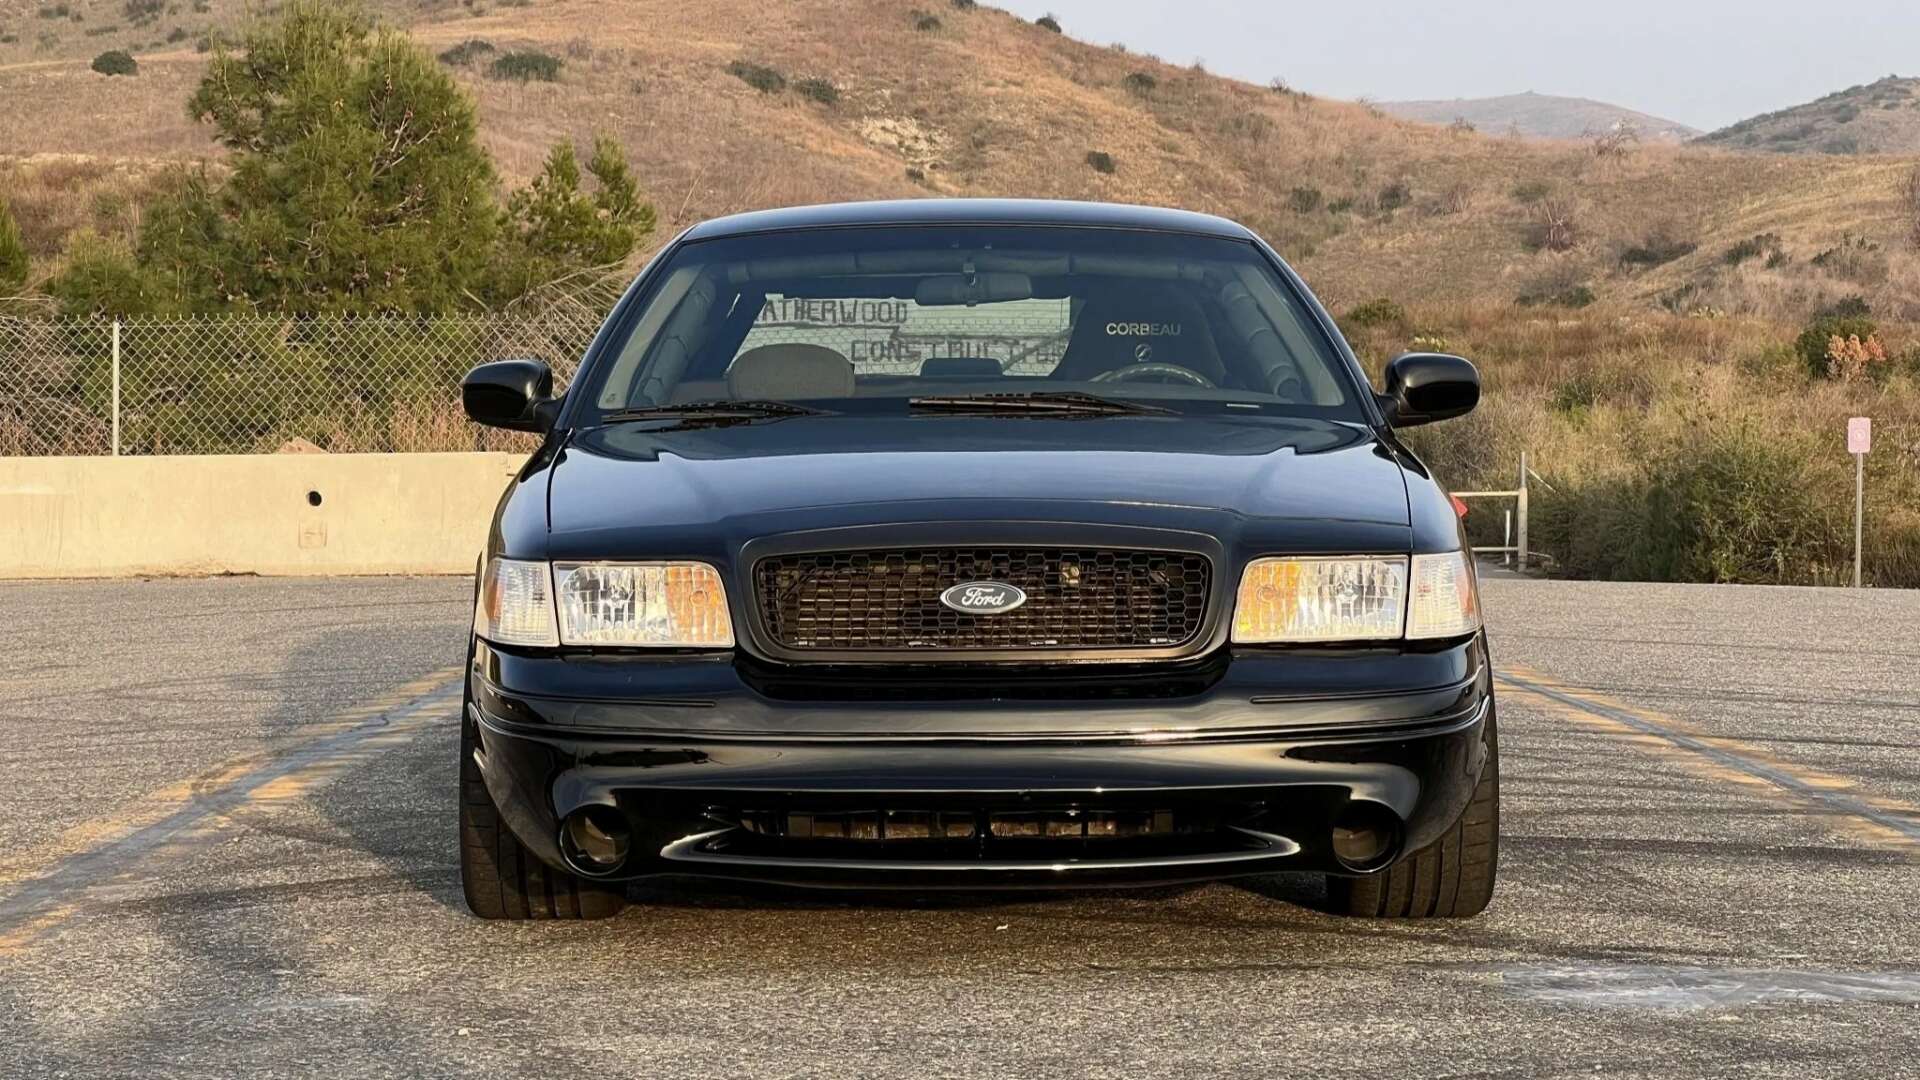 The Front Profile Of The 1999 Ford Crown Victoria